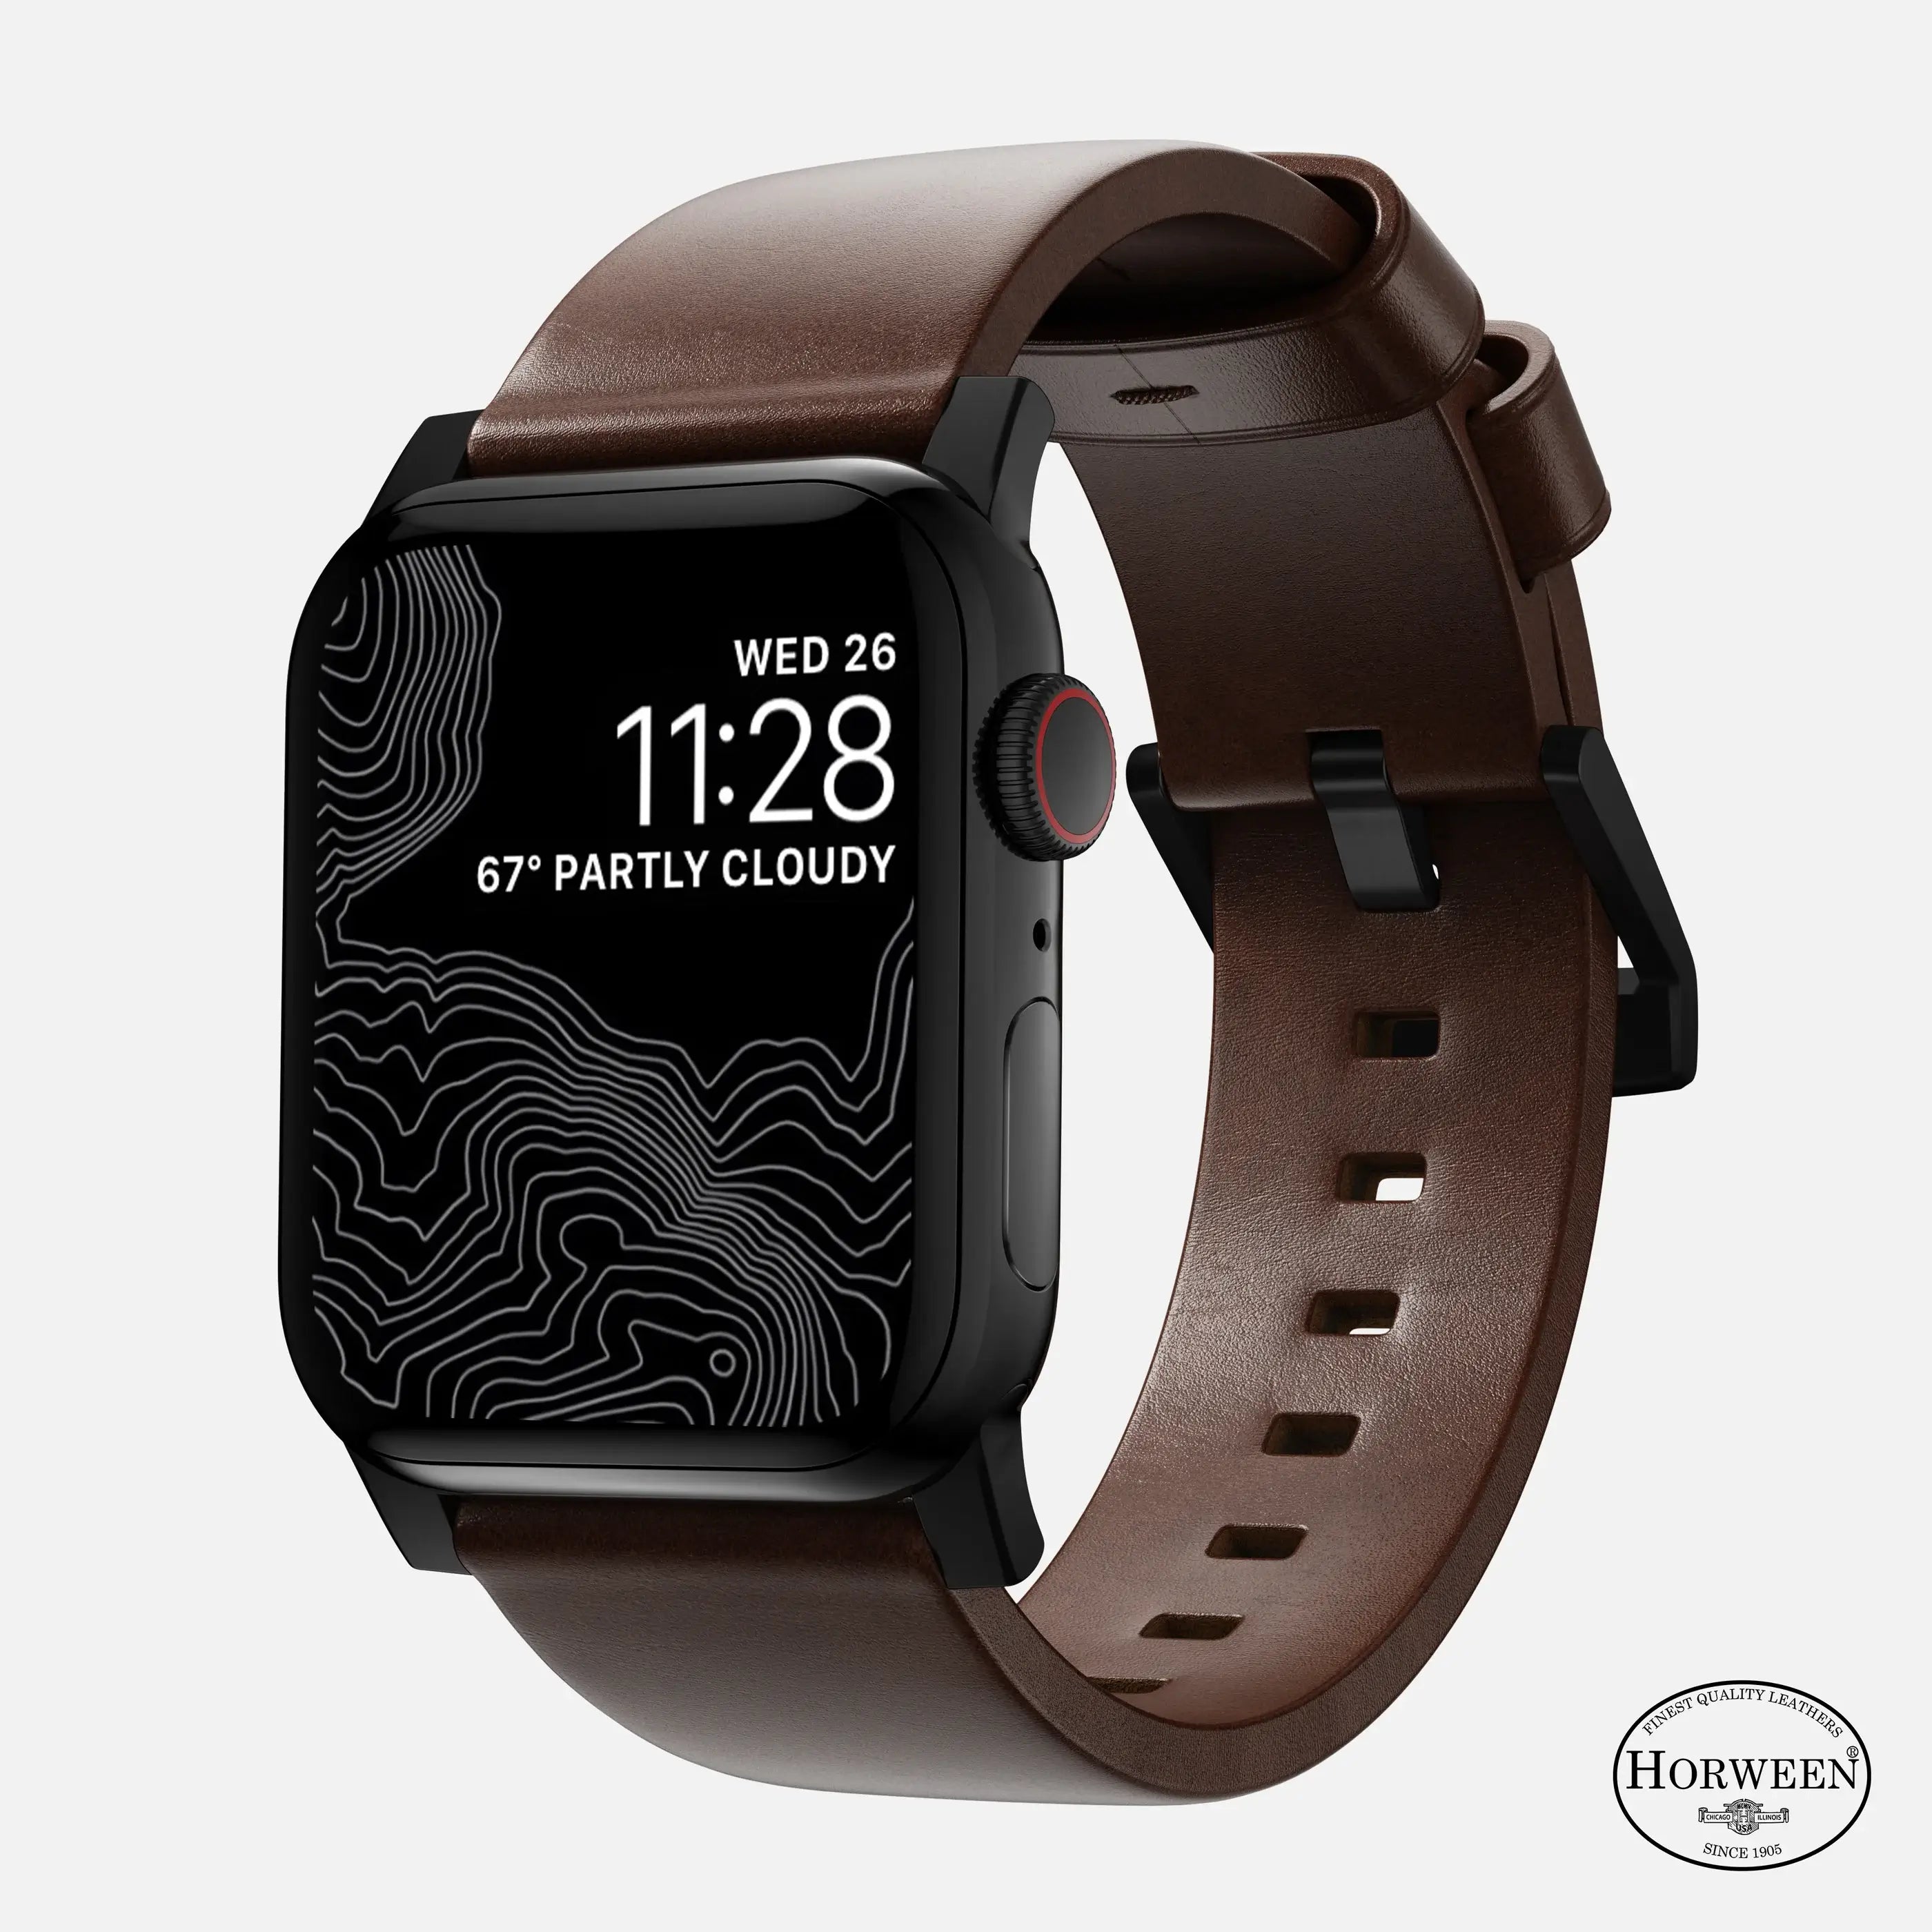 NOMAD Modern Band for Apple Watch by leather